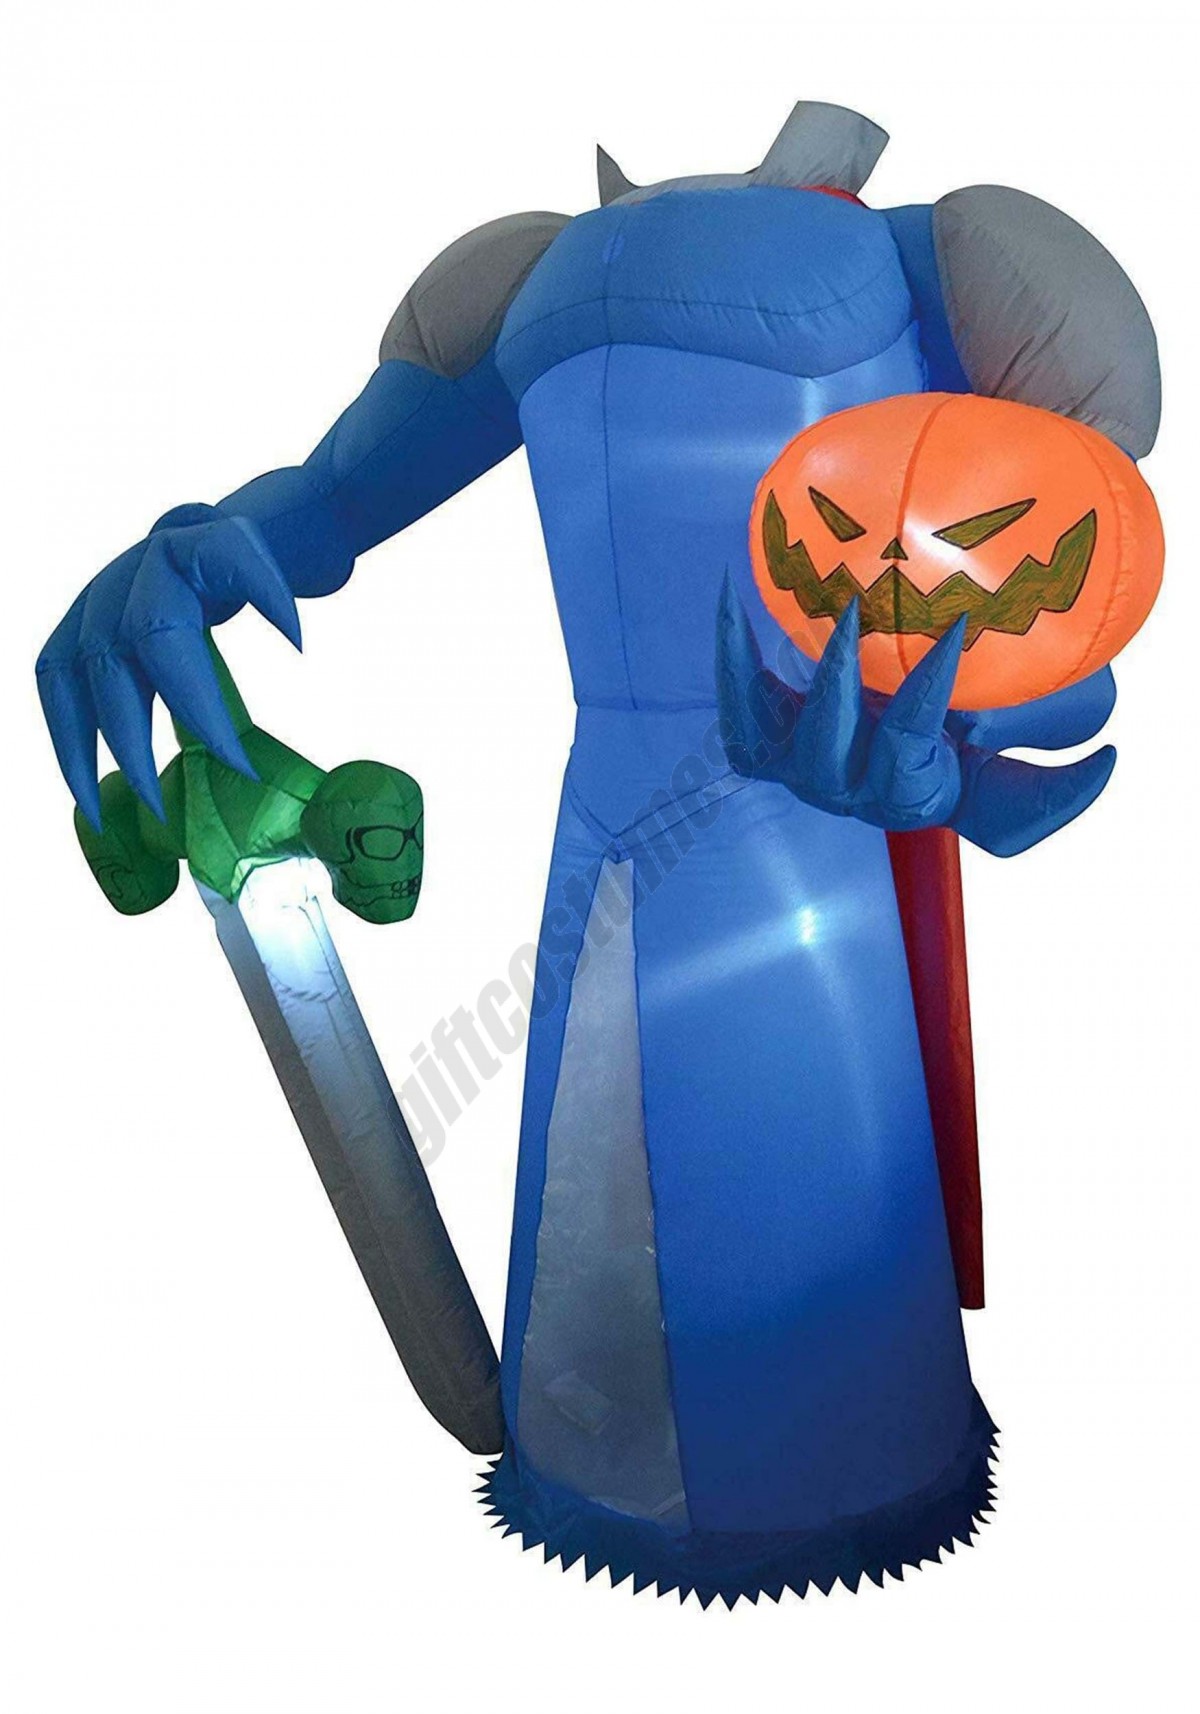 8ft Inflatable Headless Pumpkin Knight Promotions - -2